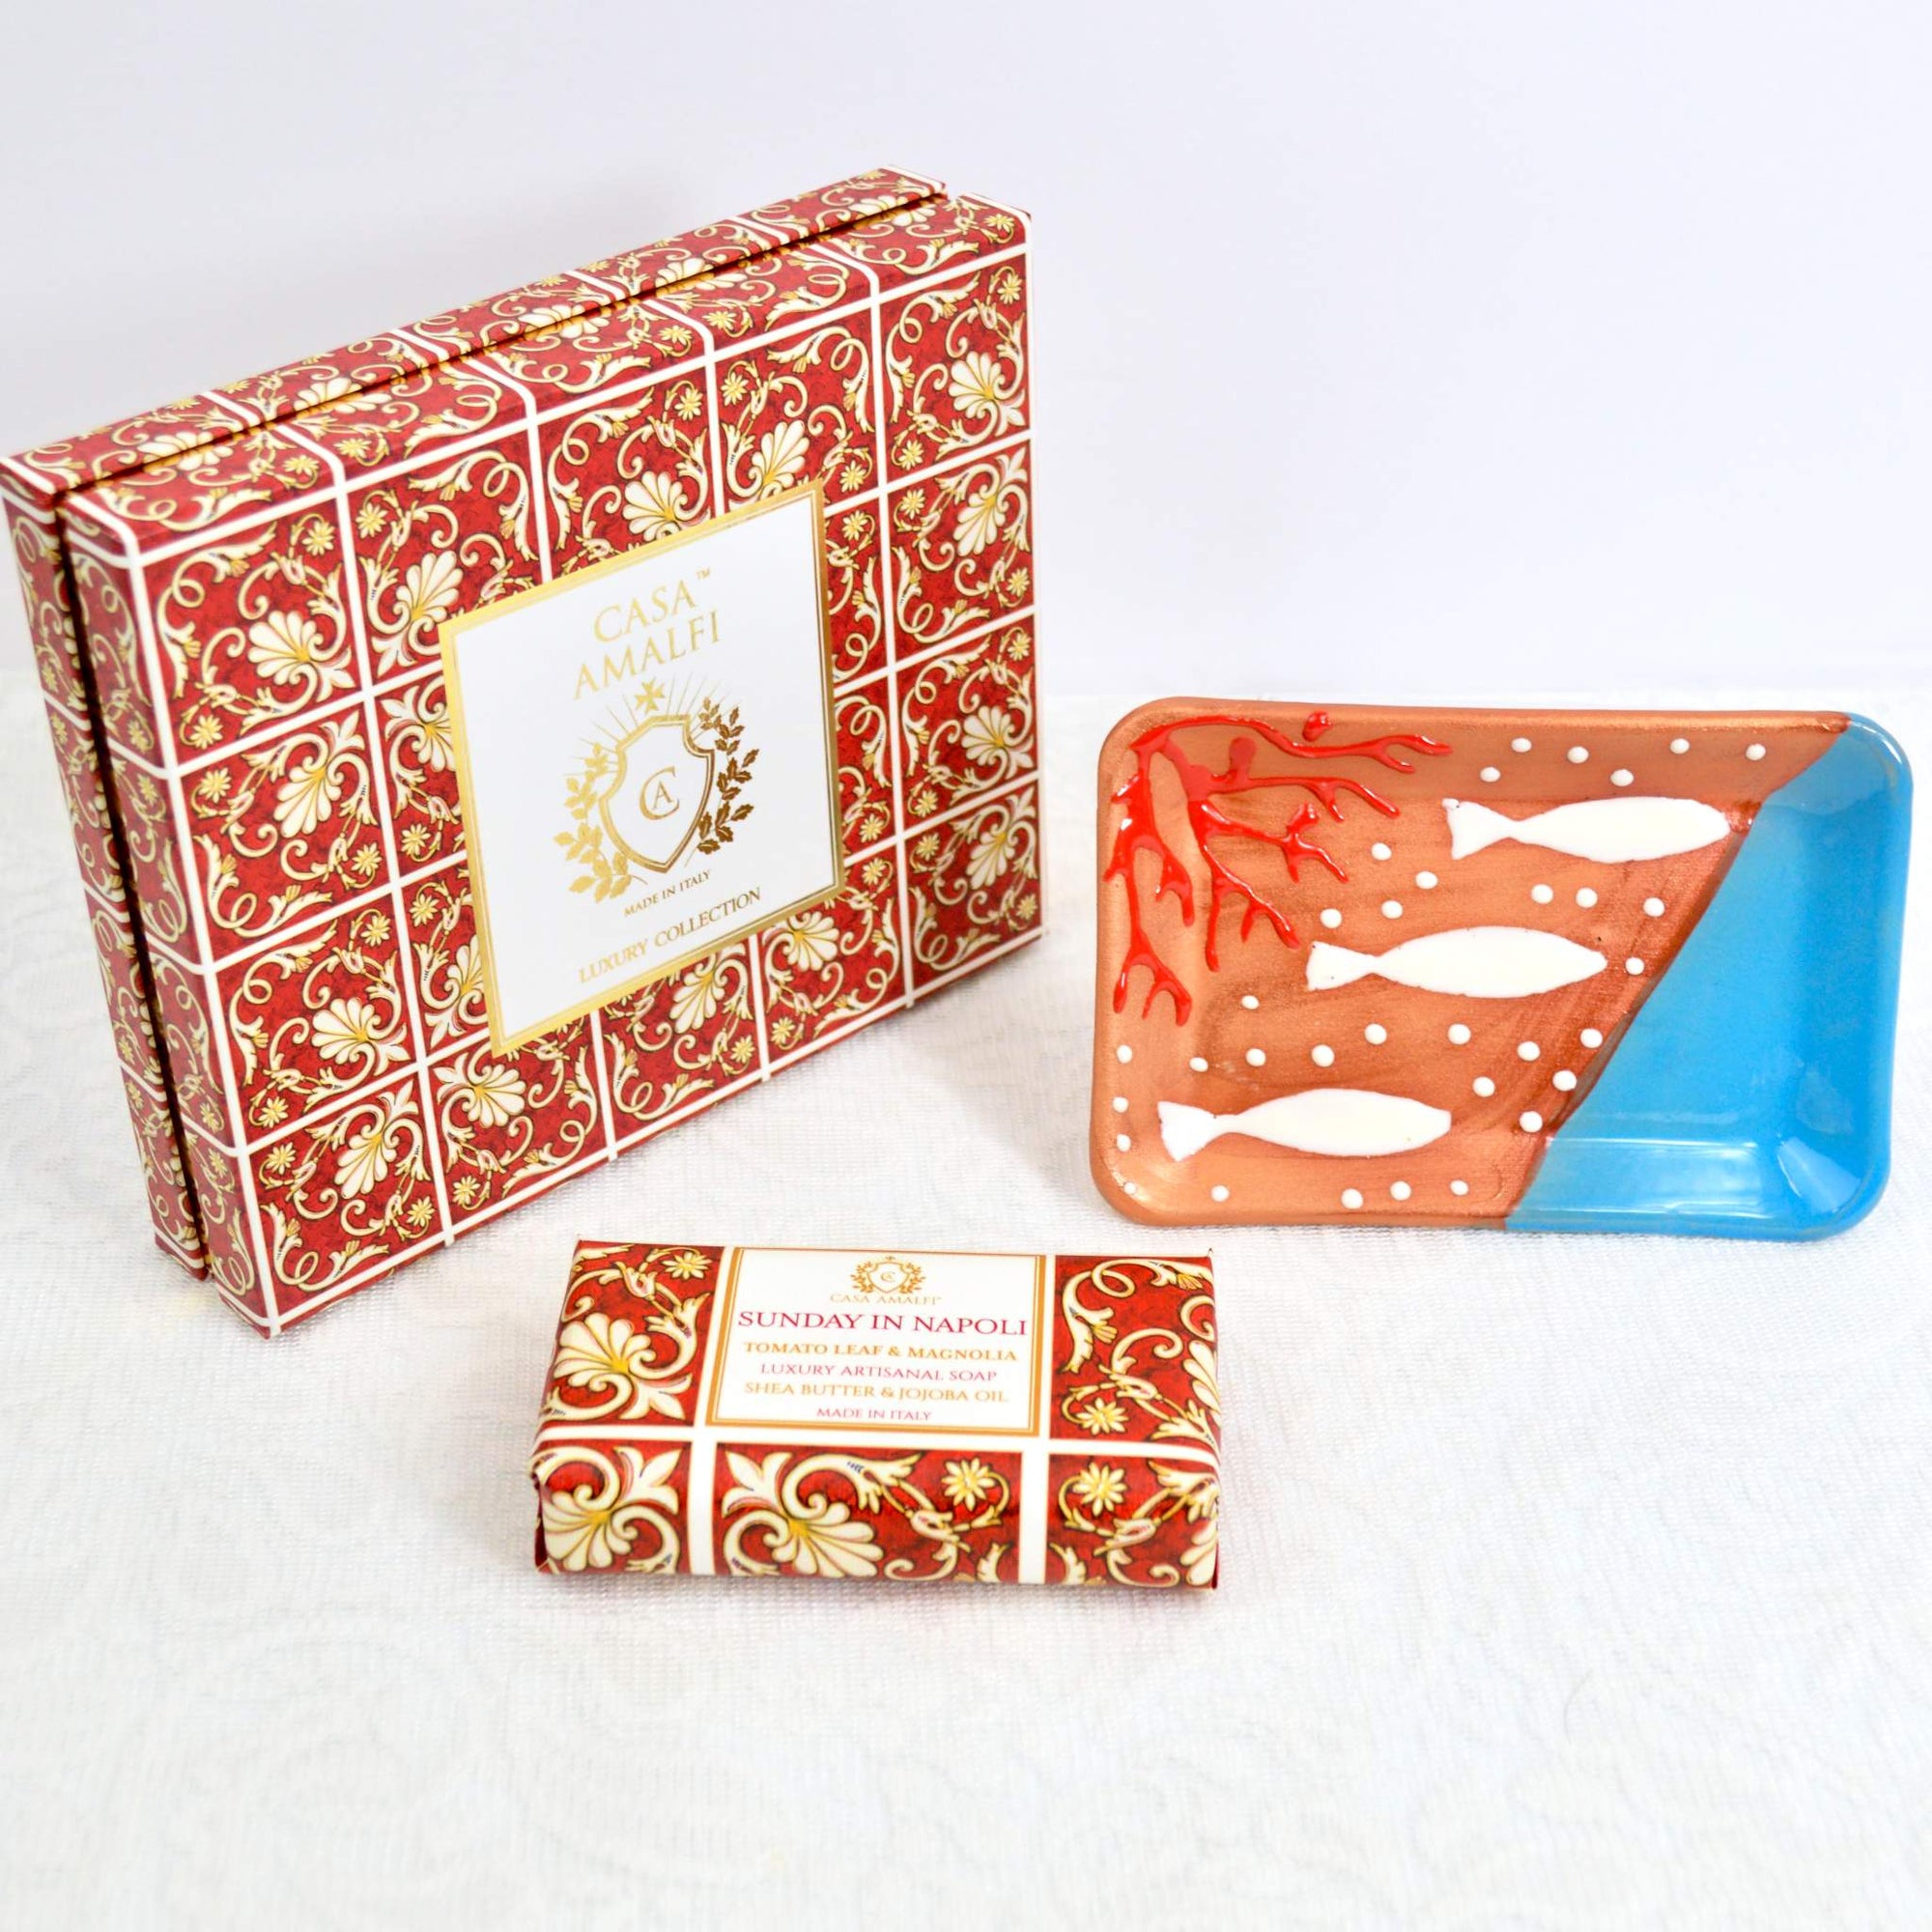 Soap and Dish Set - Red, Fish - Made in Italy - My Italian Decor